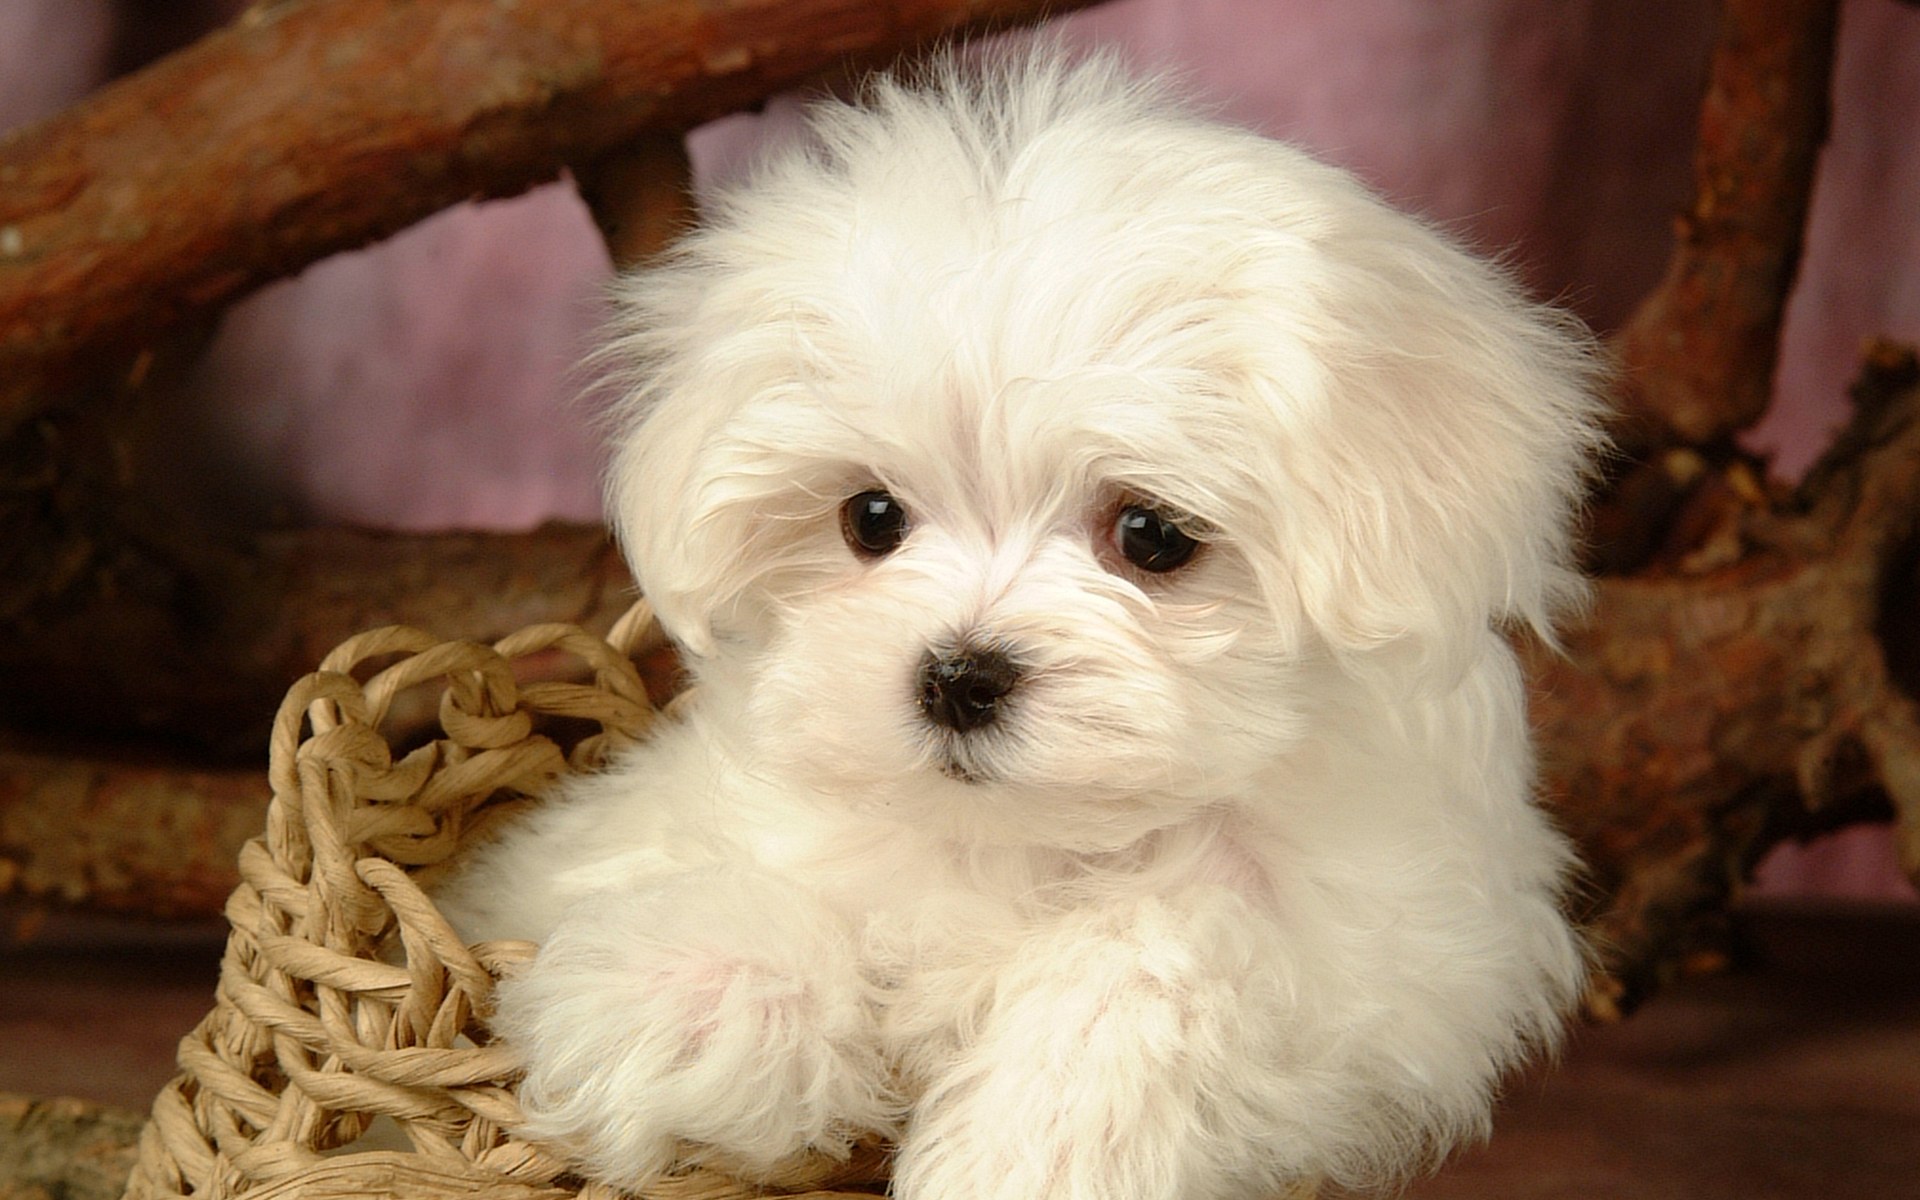  puppies screen saver dog lovely plains animal baby wallpapers